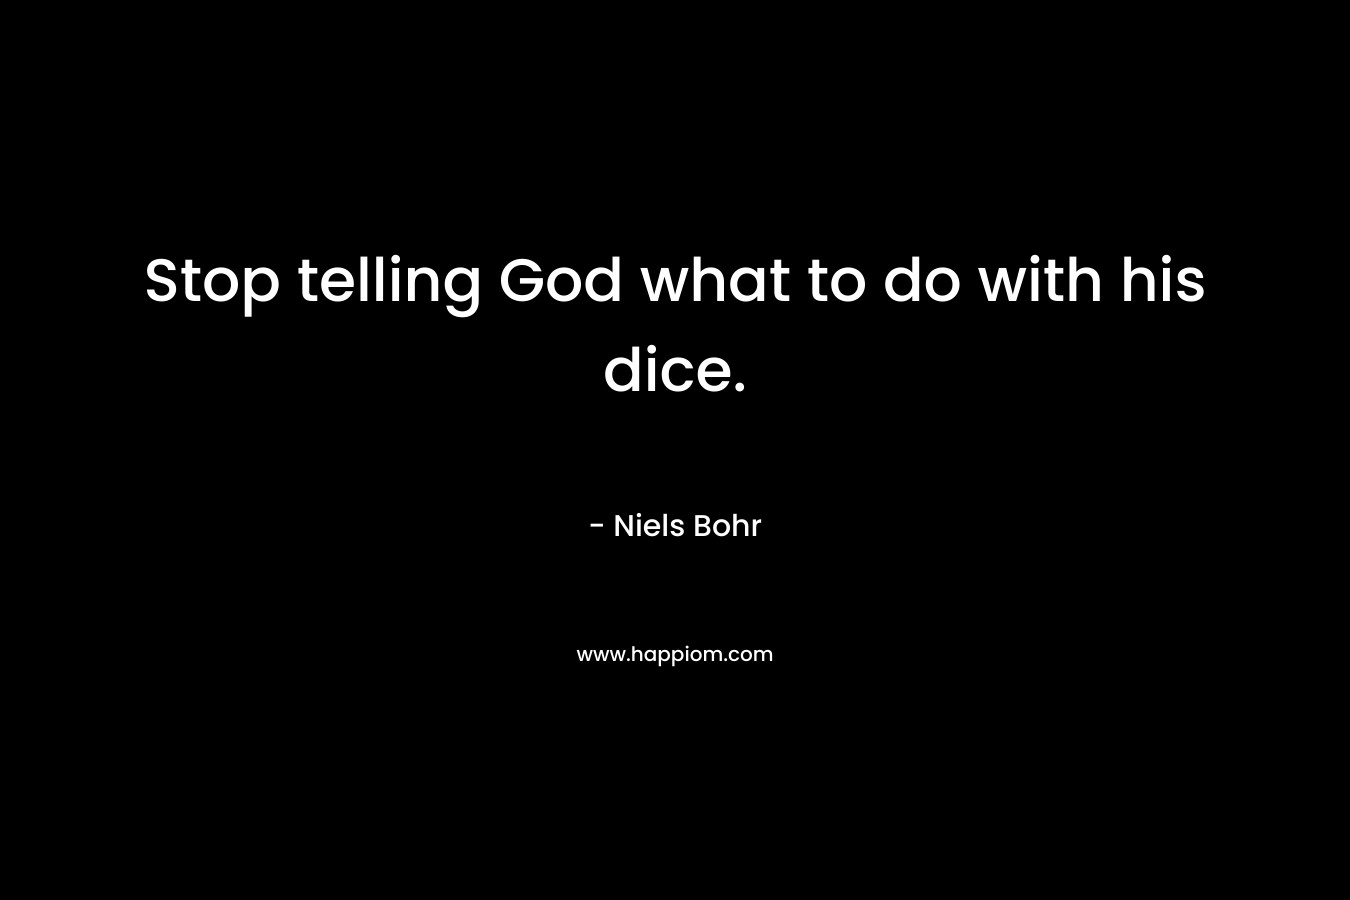 Stop telling God what to do with his dice.